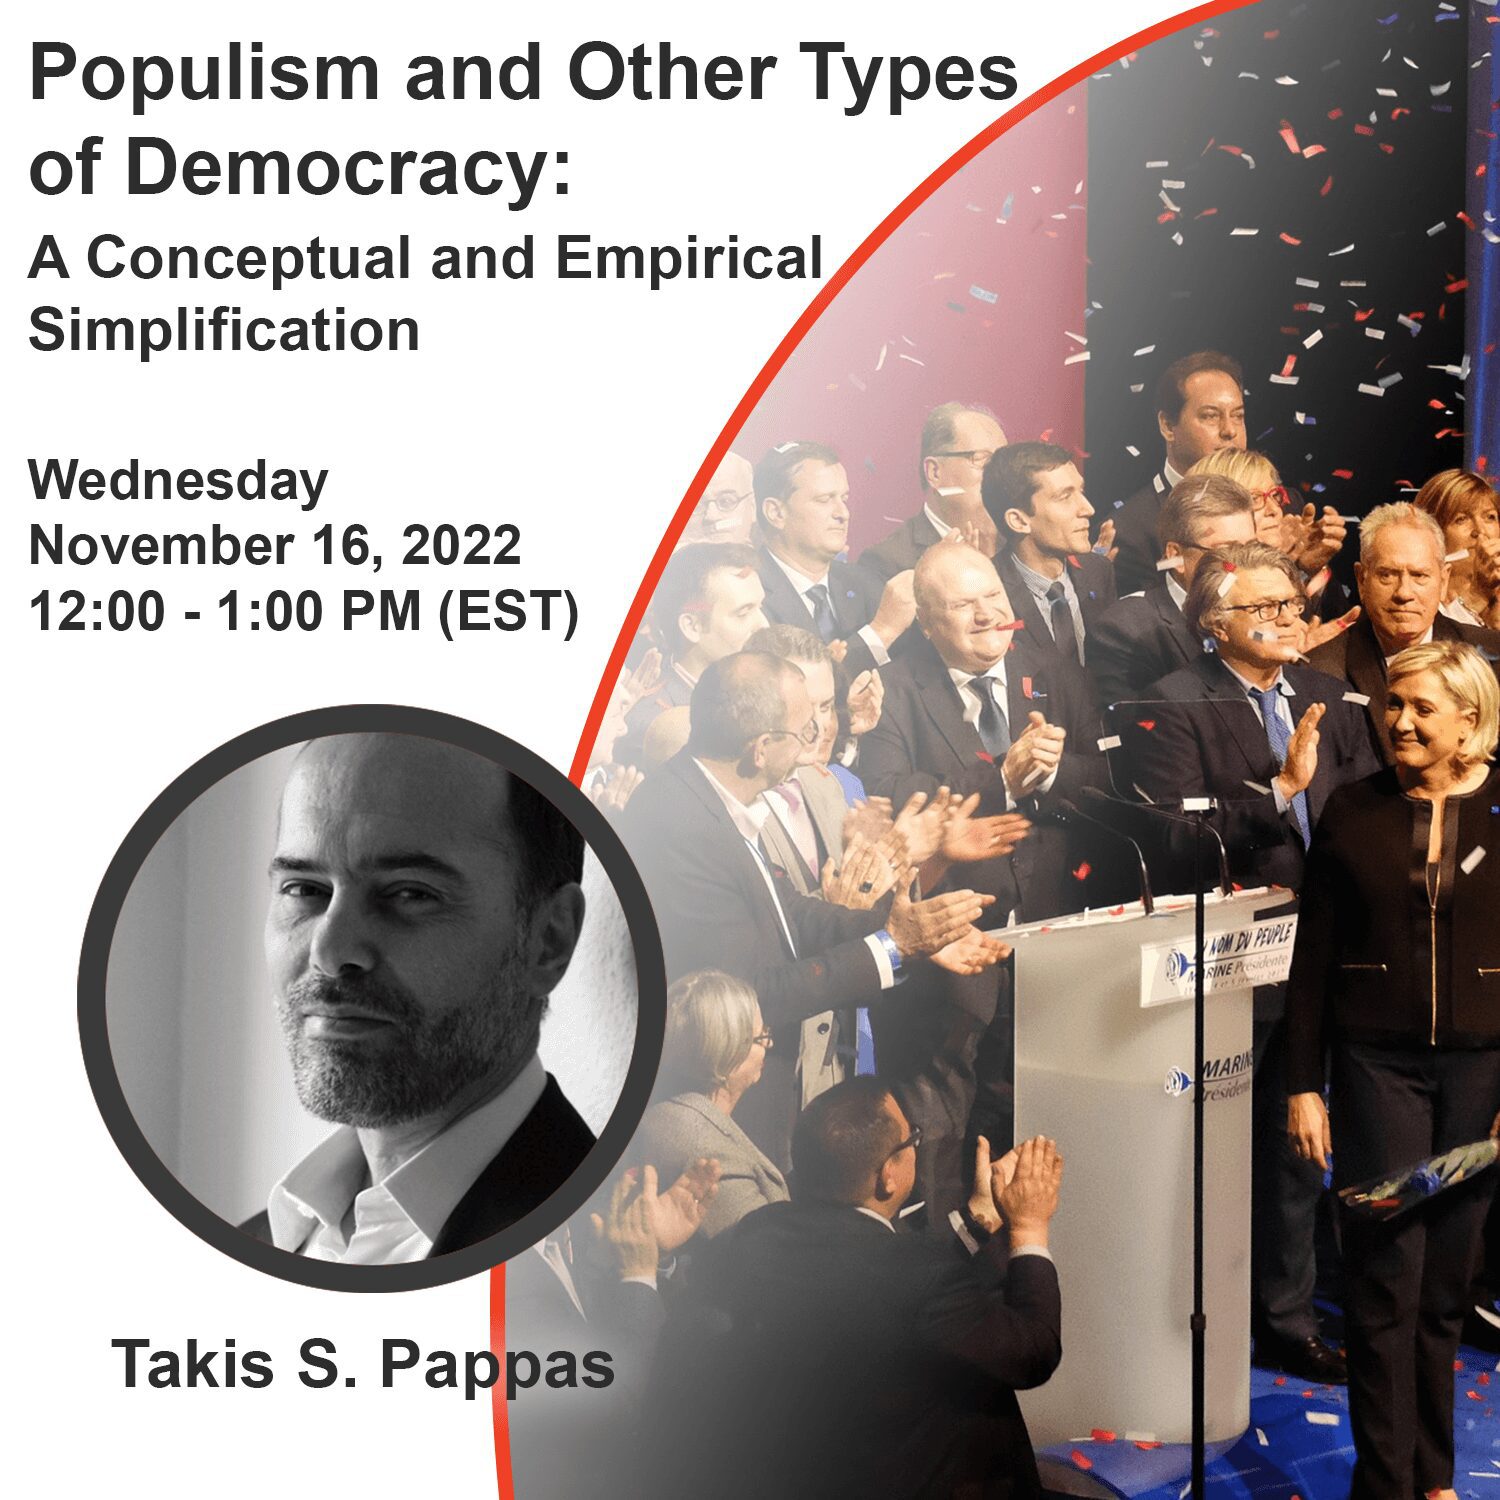 Populism and Other Types of Democracy flyer